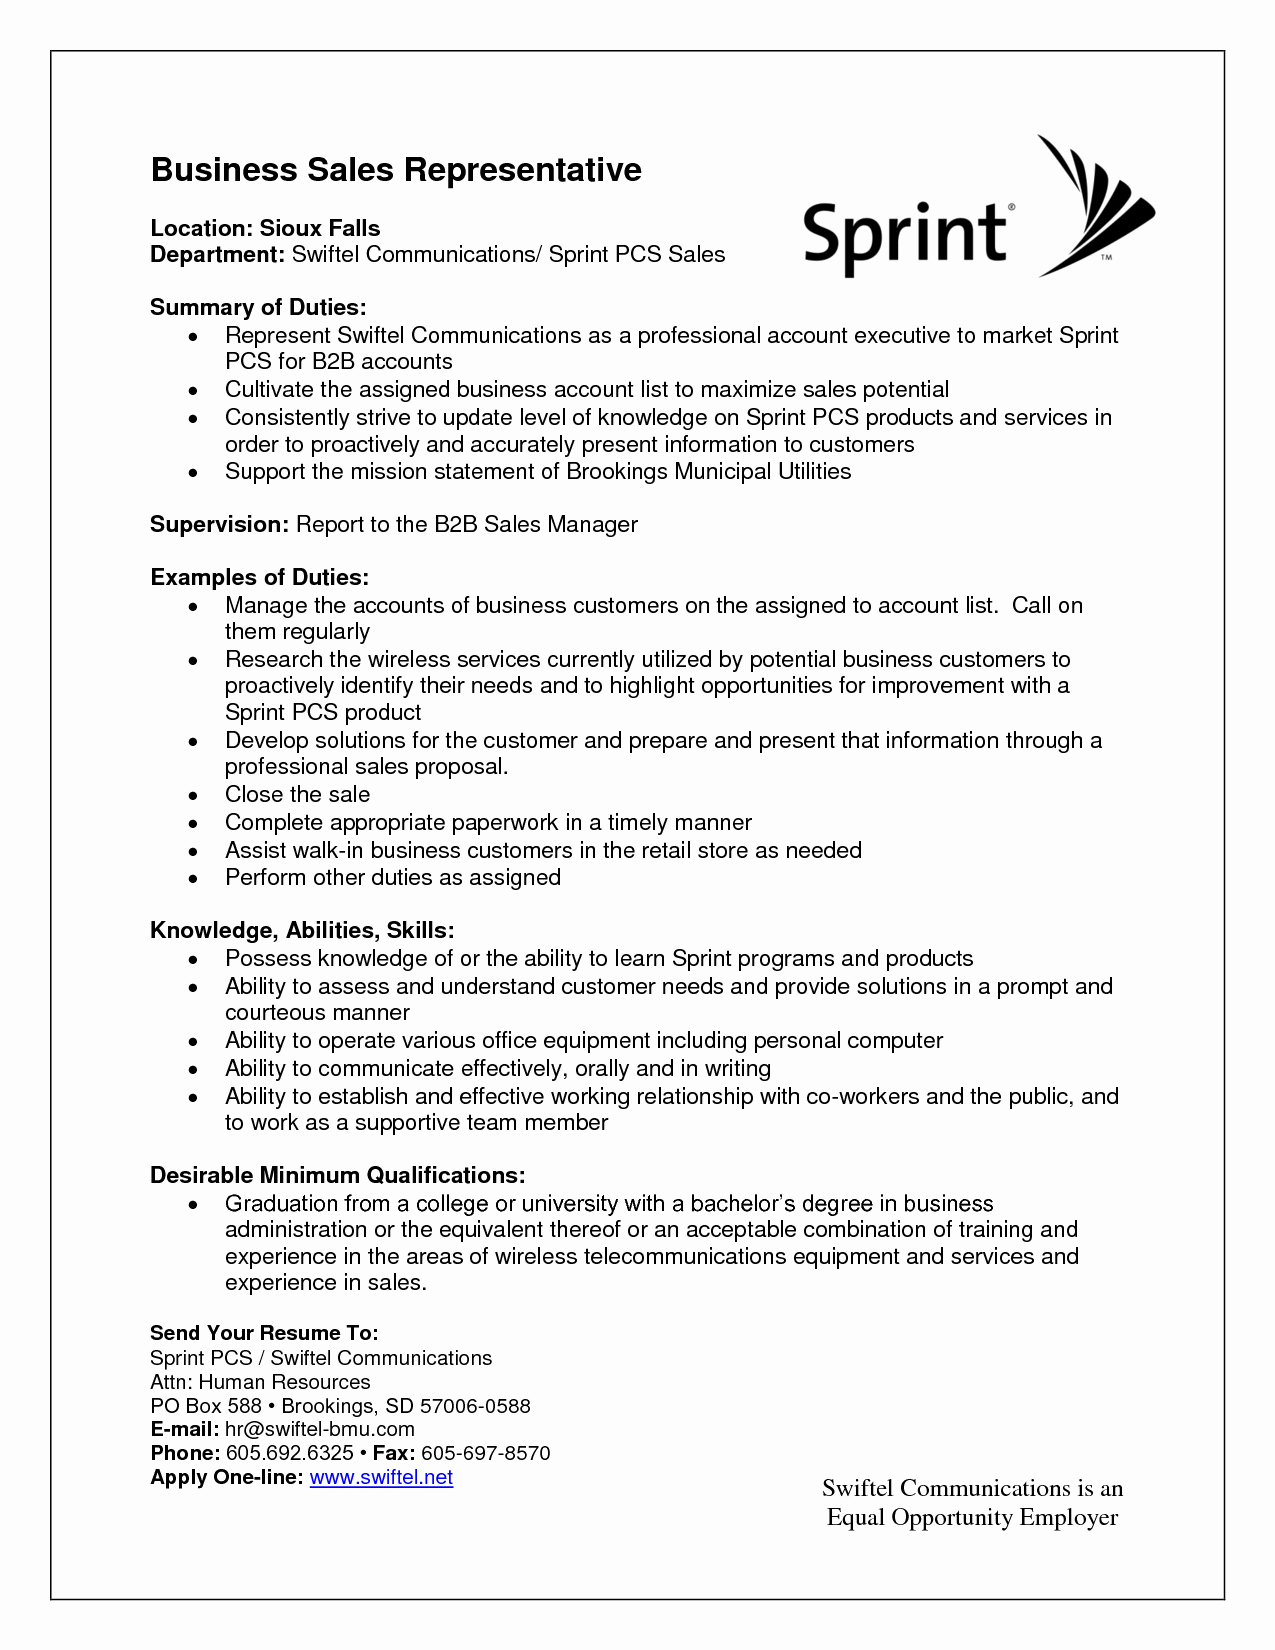 Job Proposal Template Free Word Best Of Writing A Job Proposal for Retail Manager